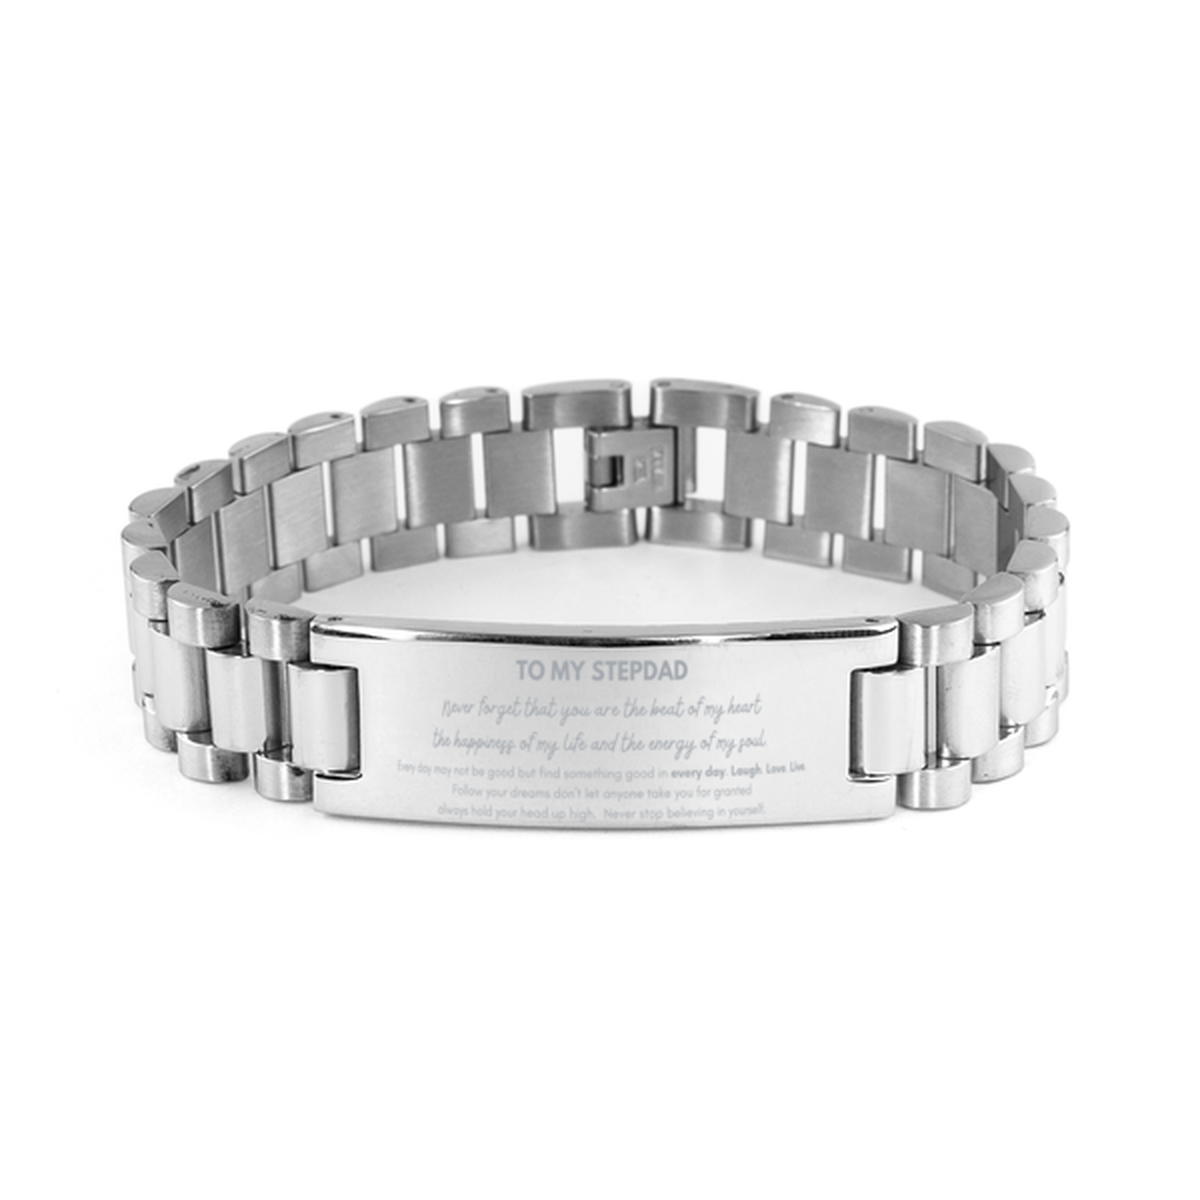 To My Stepdad Bracelet Gifts, Christmas Stepdad Ladder Stainless Steel Bracelet Present, Birthday Unique Motivational For Stepdad, To My Stepdad Never forget that you are the beat of my heart the happiness of my life and the energy of my soul